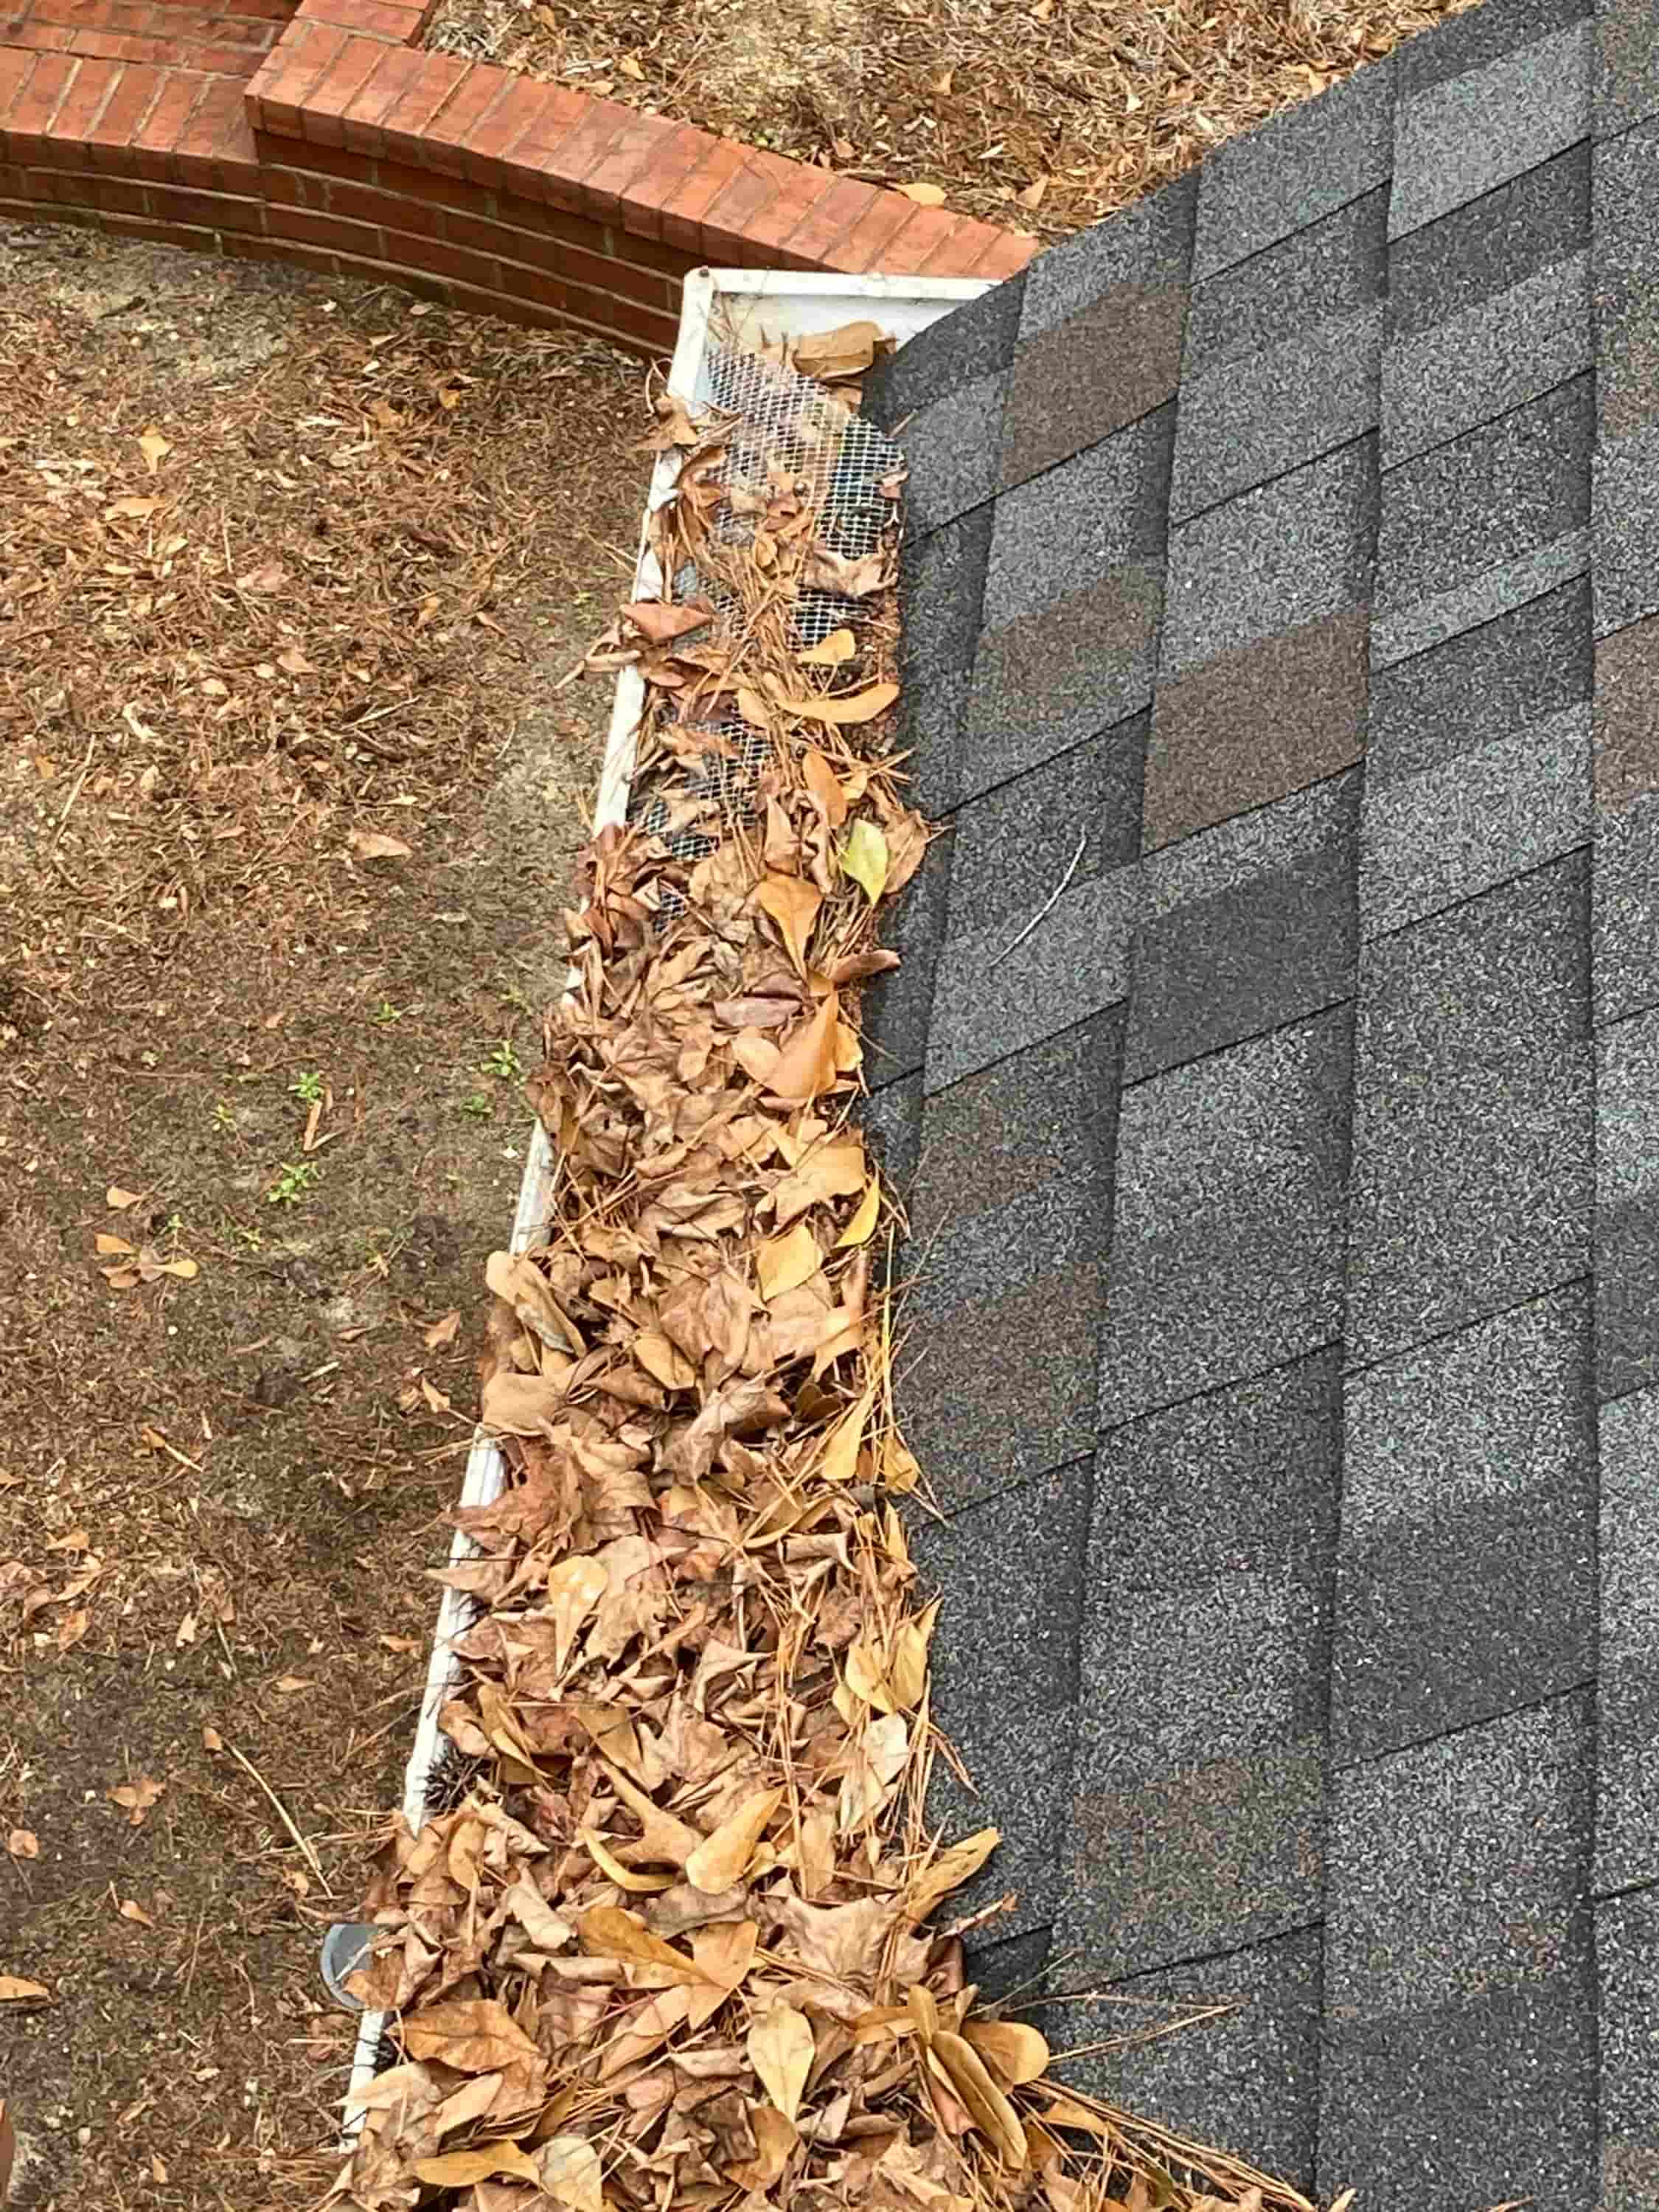 cleaning white gutters